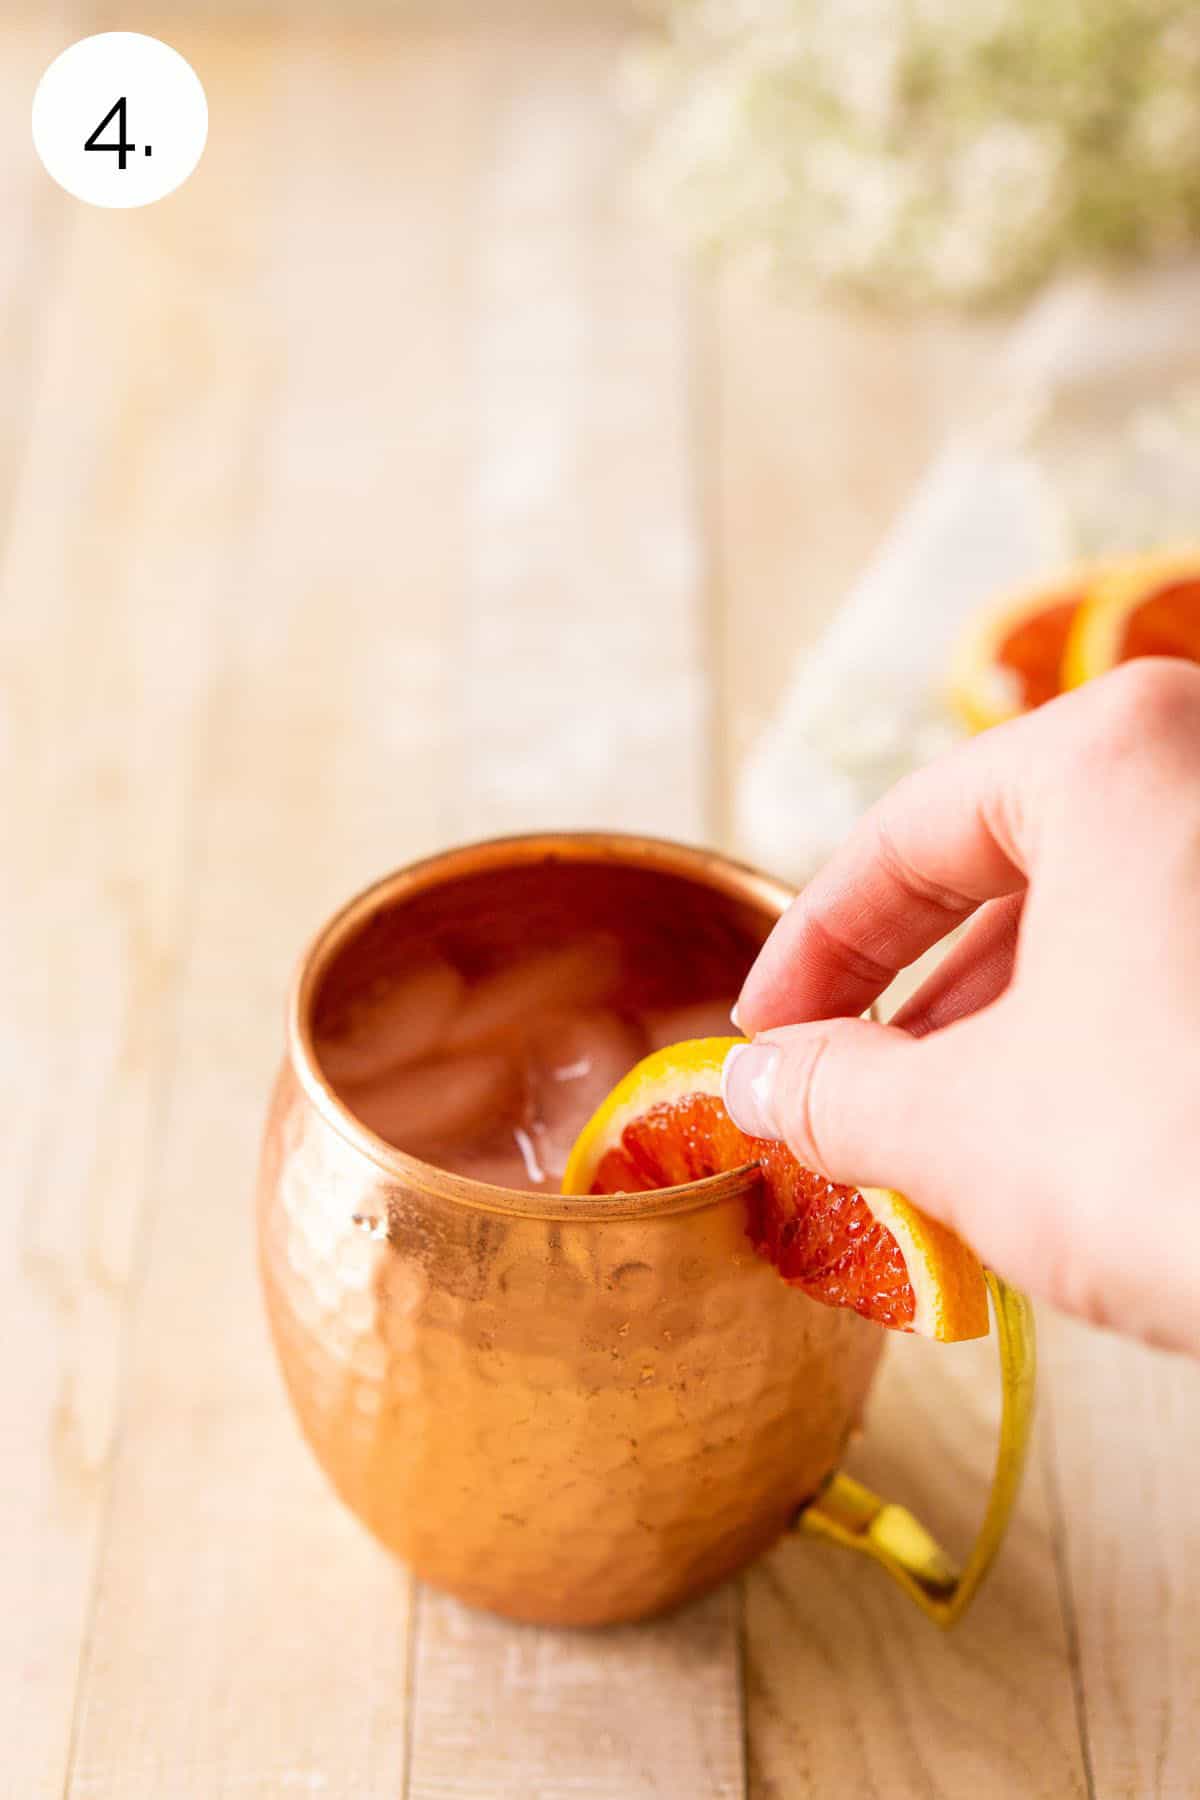 A hand placing a blood range slice on the rim of the copper mug on a cream-colored wooden surface.